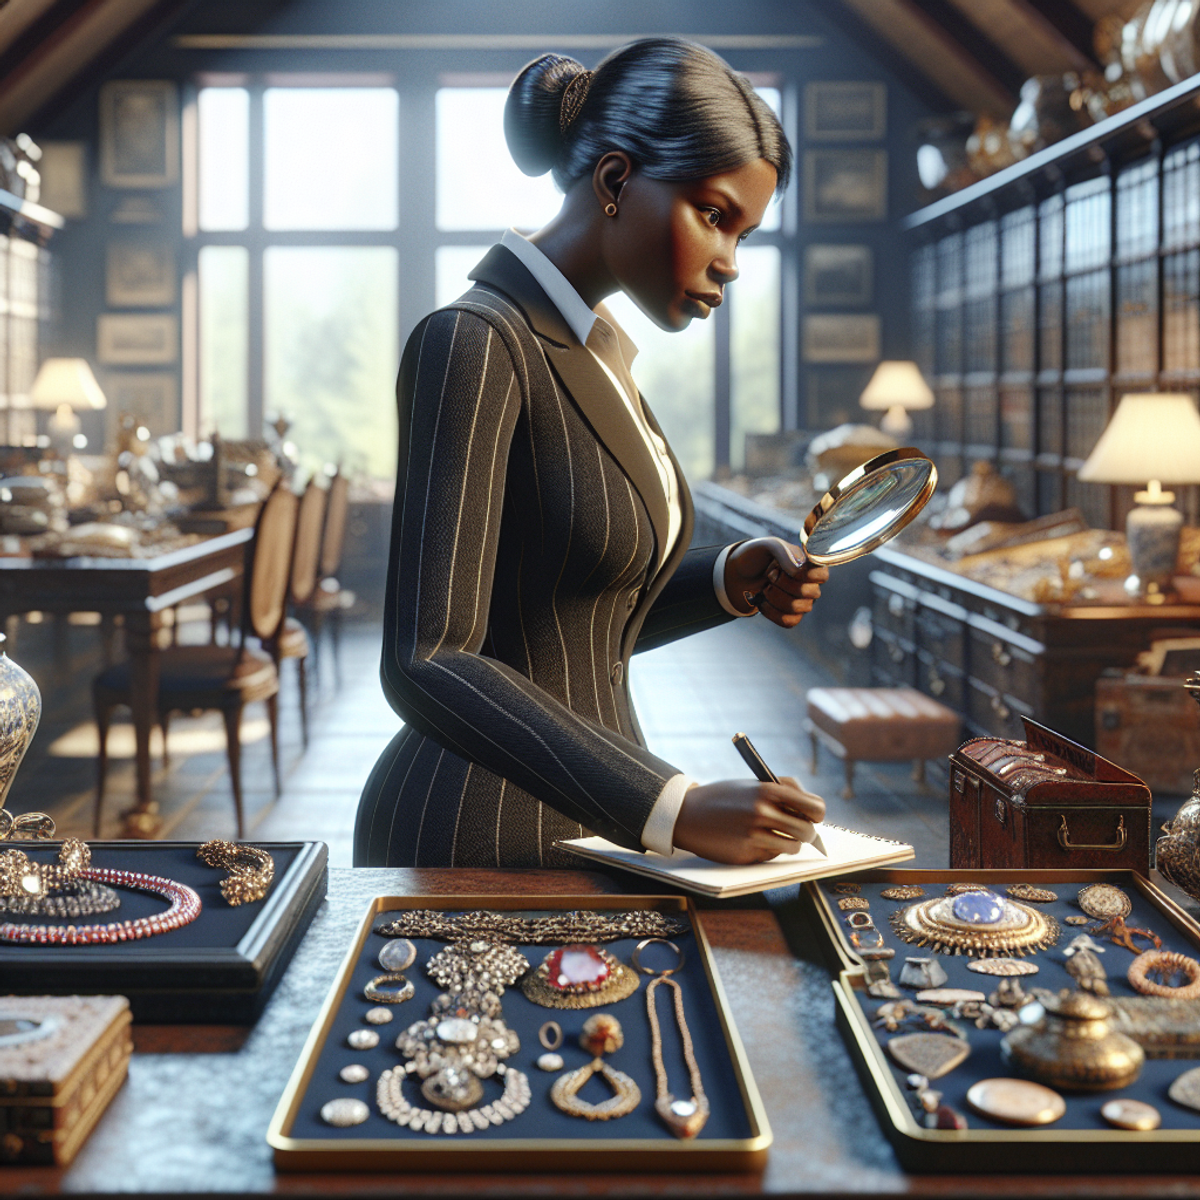 A Black female appraiser attentively examining various valuable items.